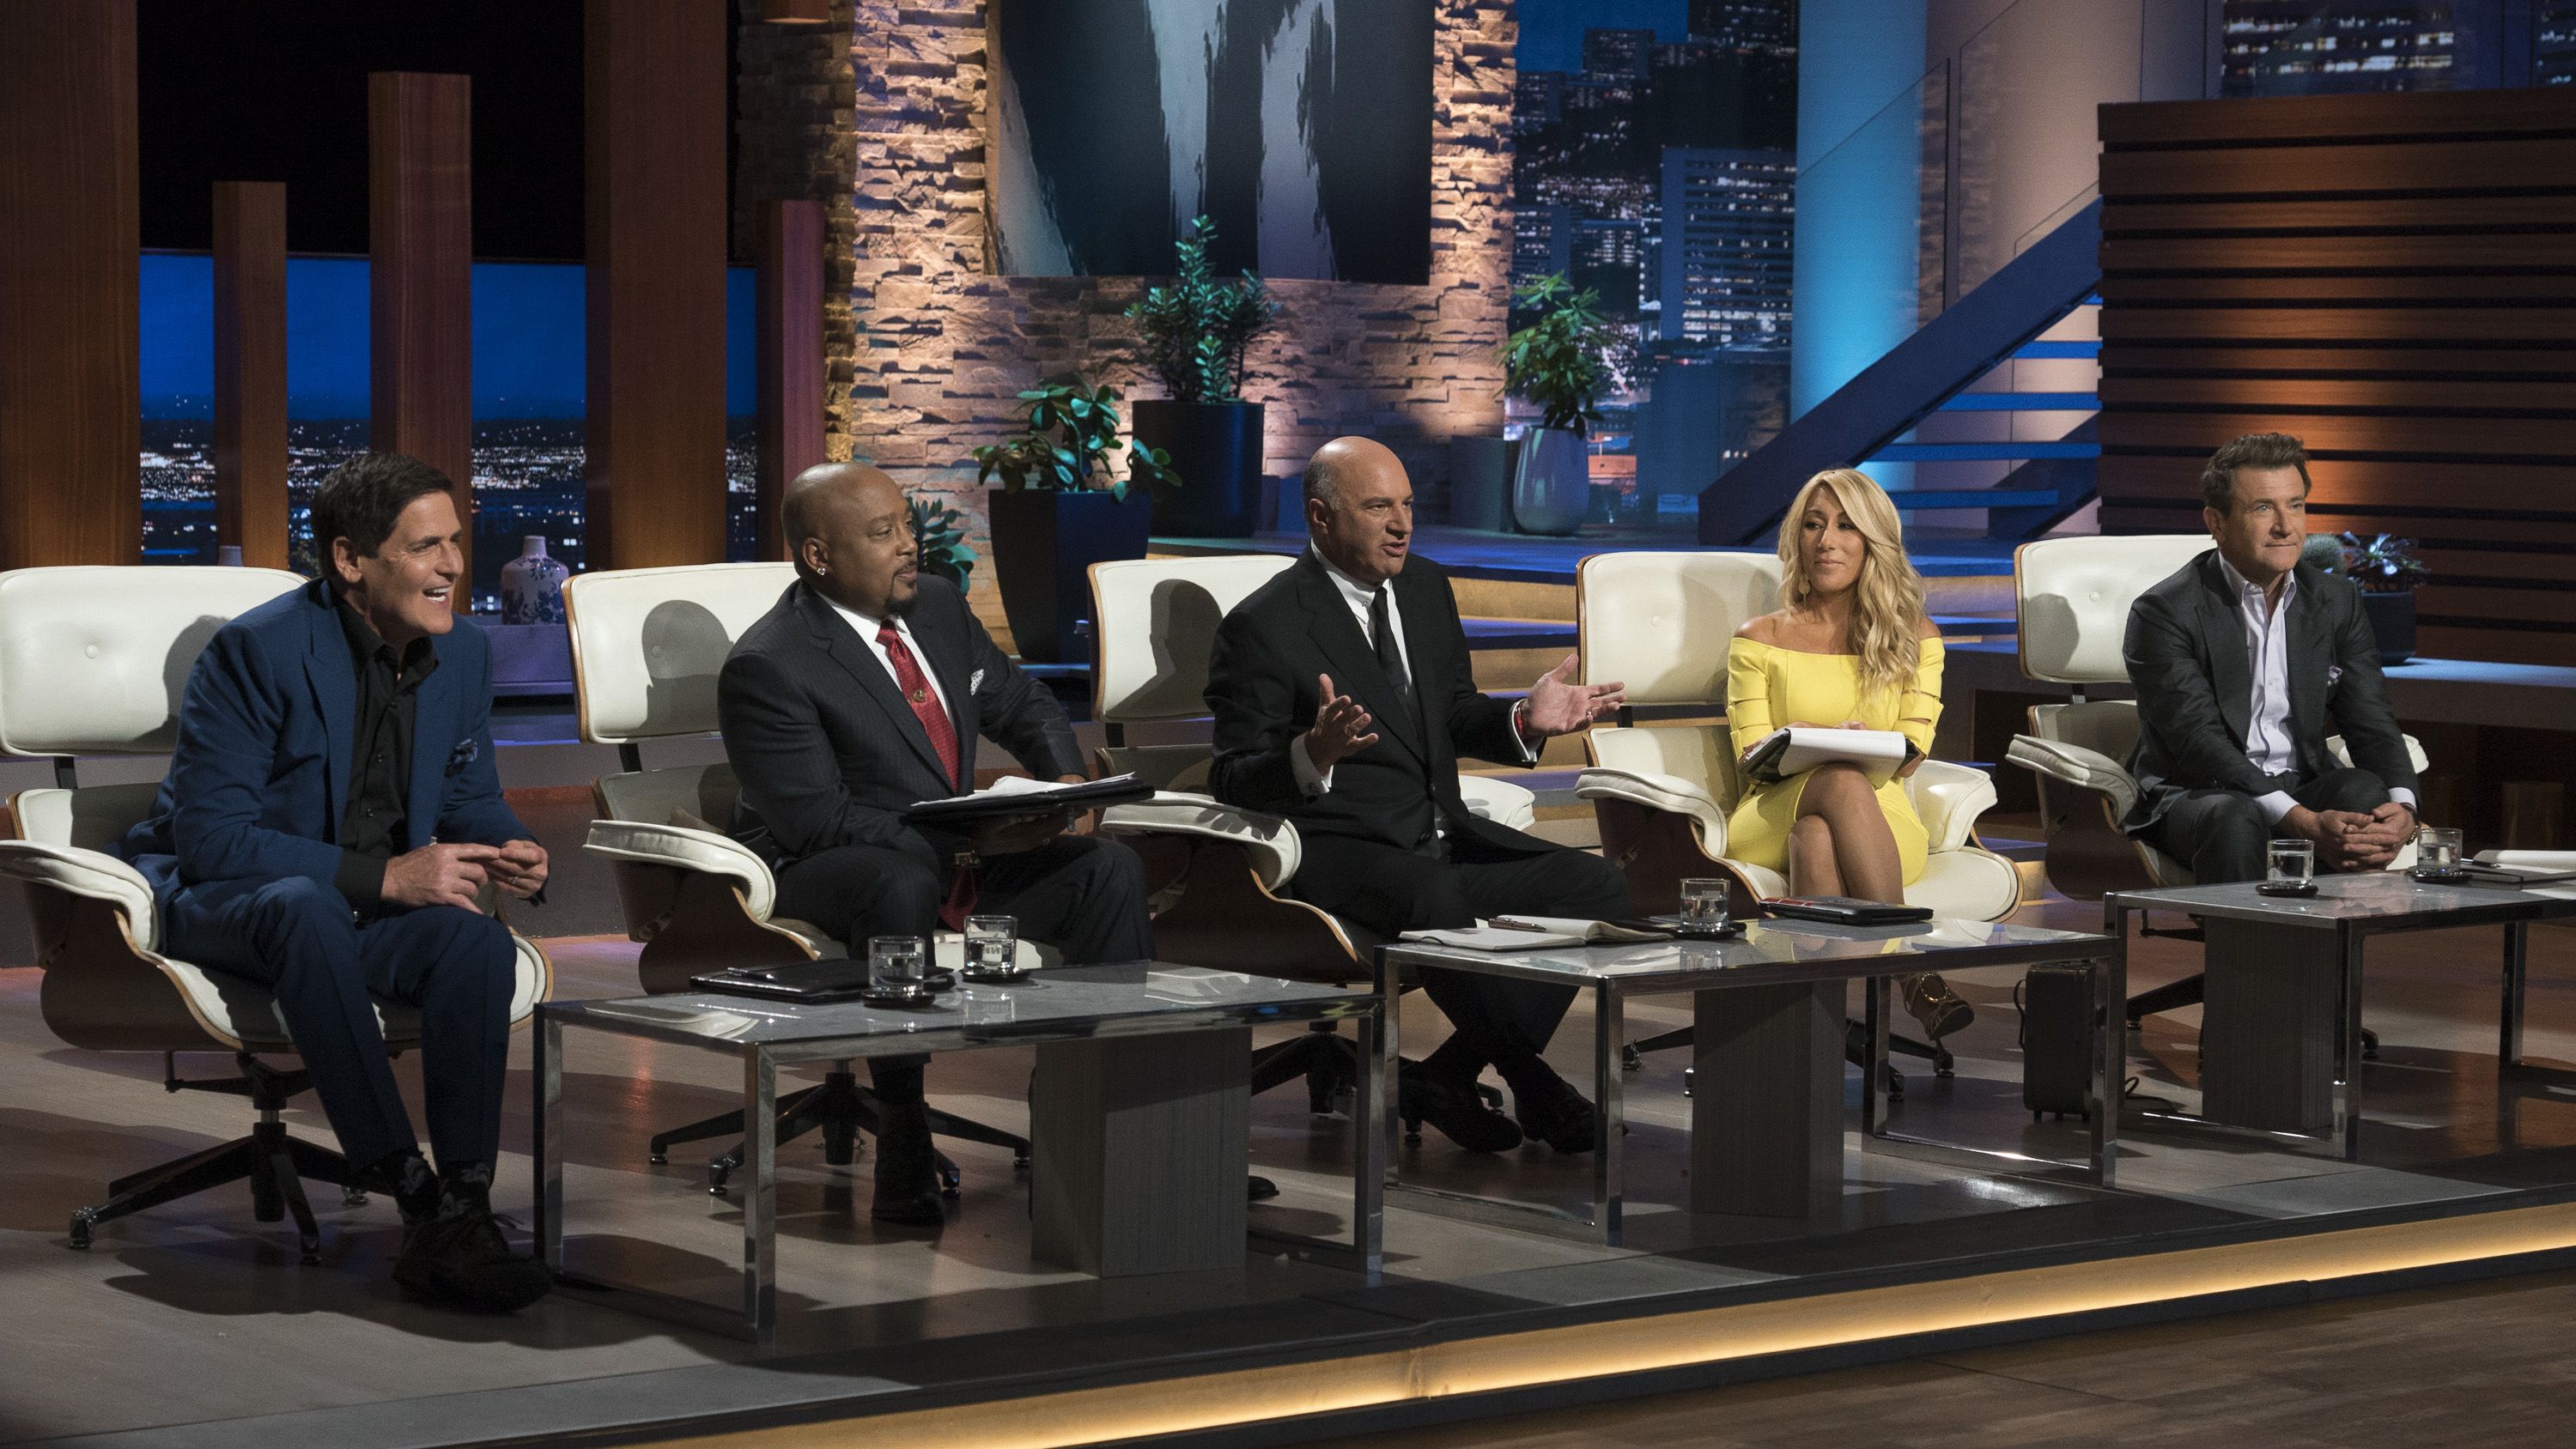 SharkTank — “A Decade of Dreams” and a night of rain, fire, dust